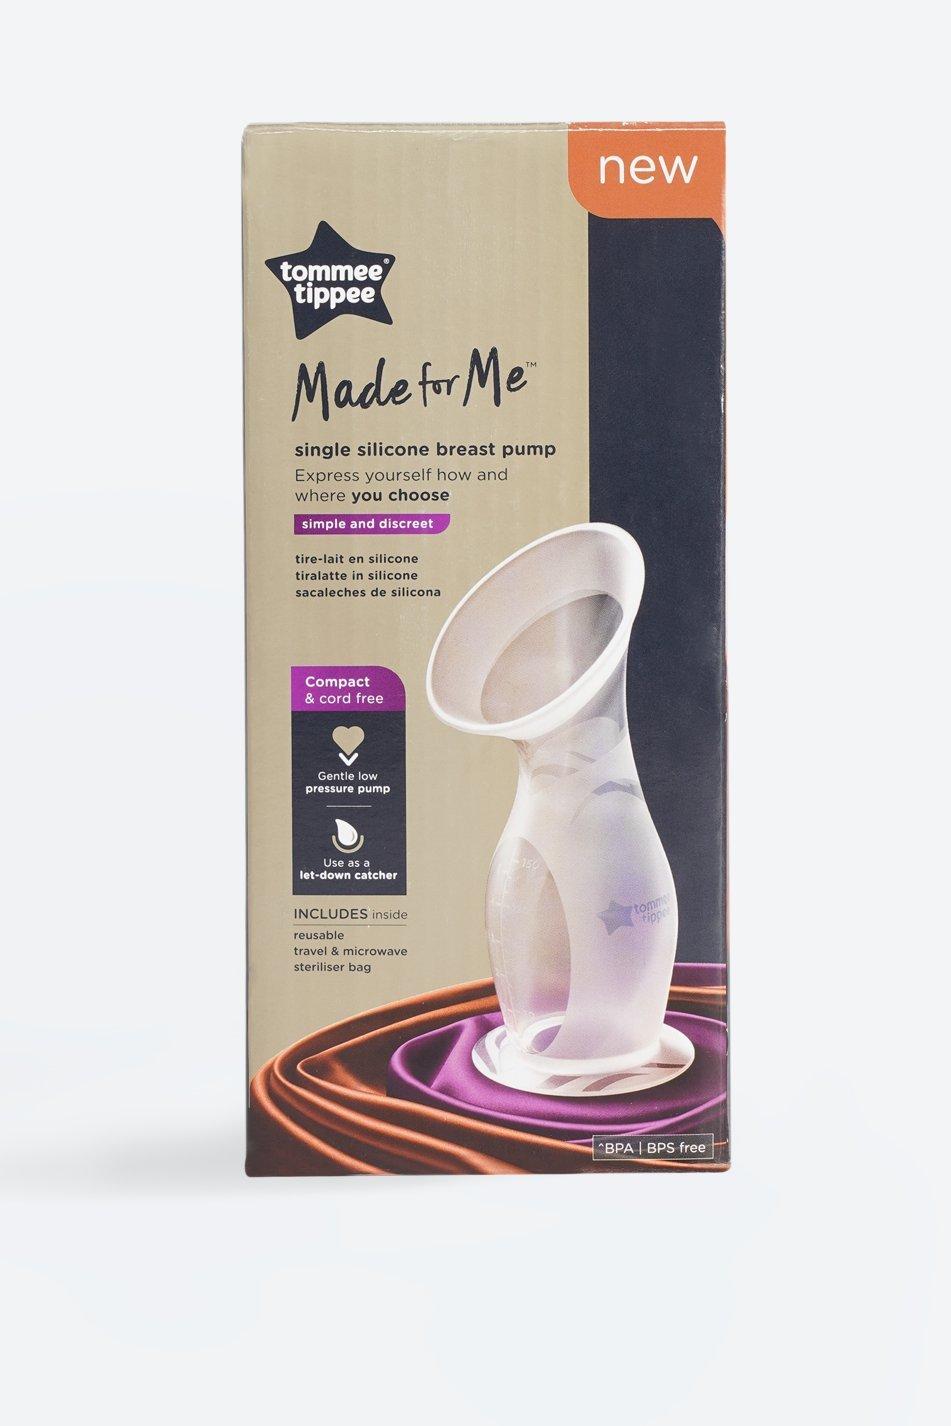 Tommee Tippee 2 in 1 Silicone Breast Pump